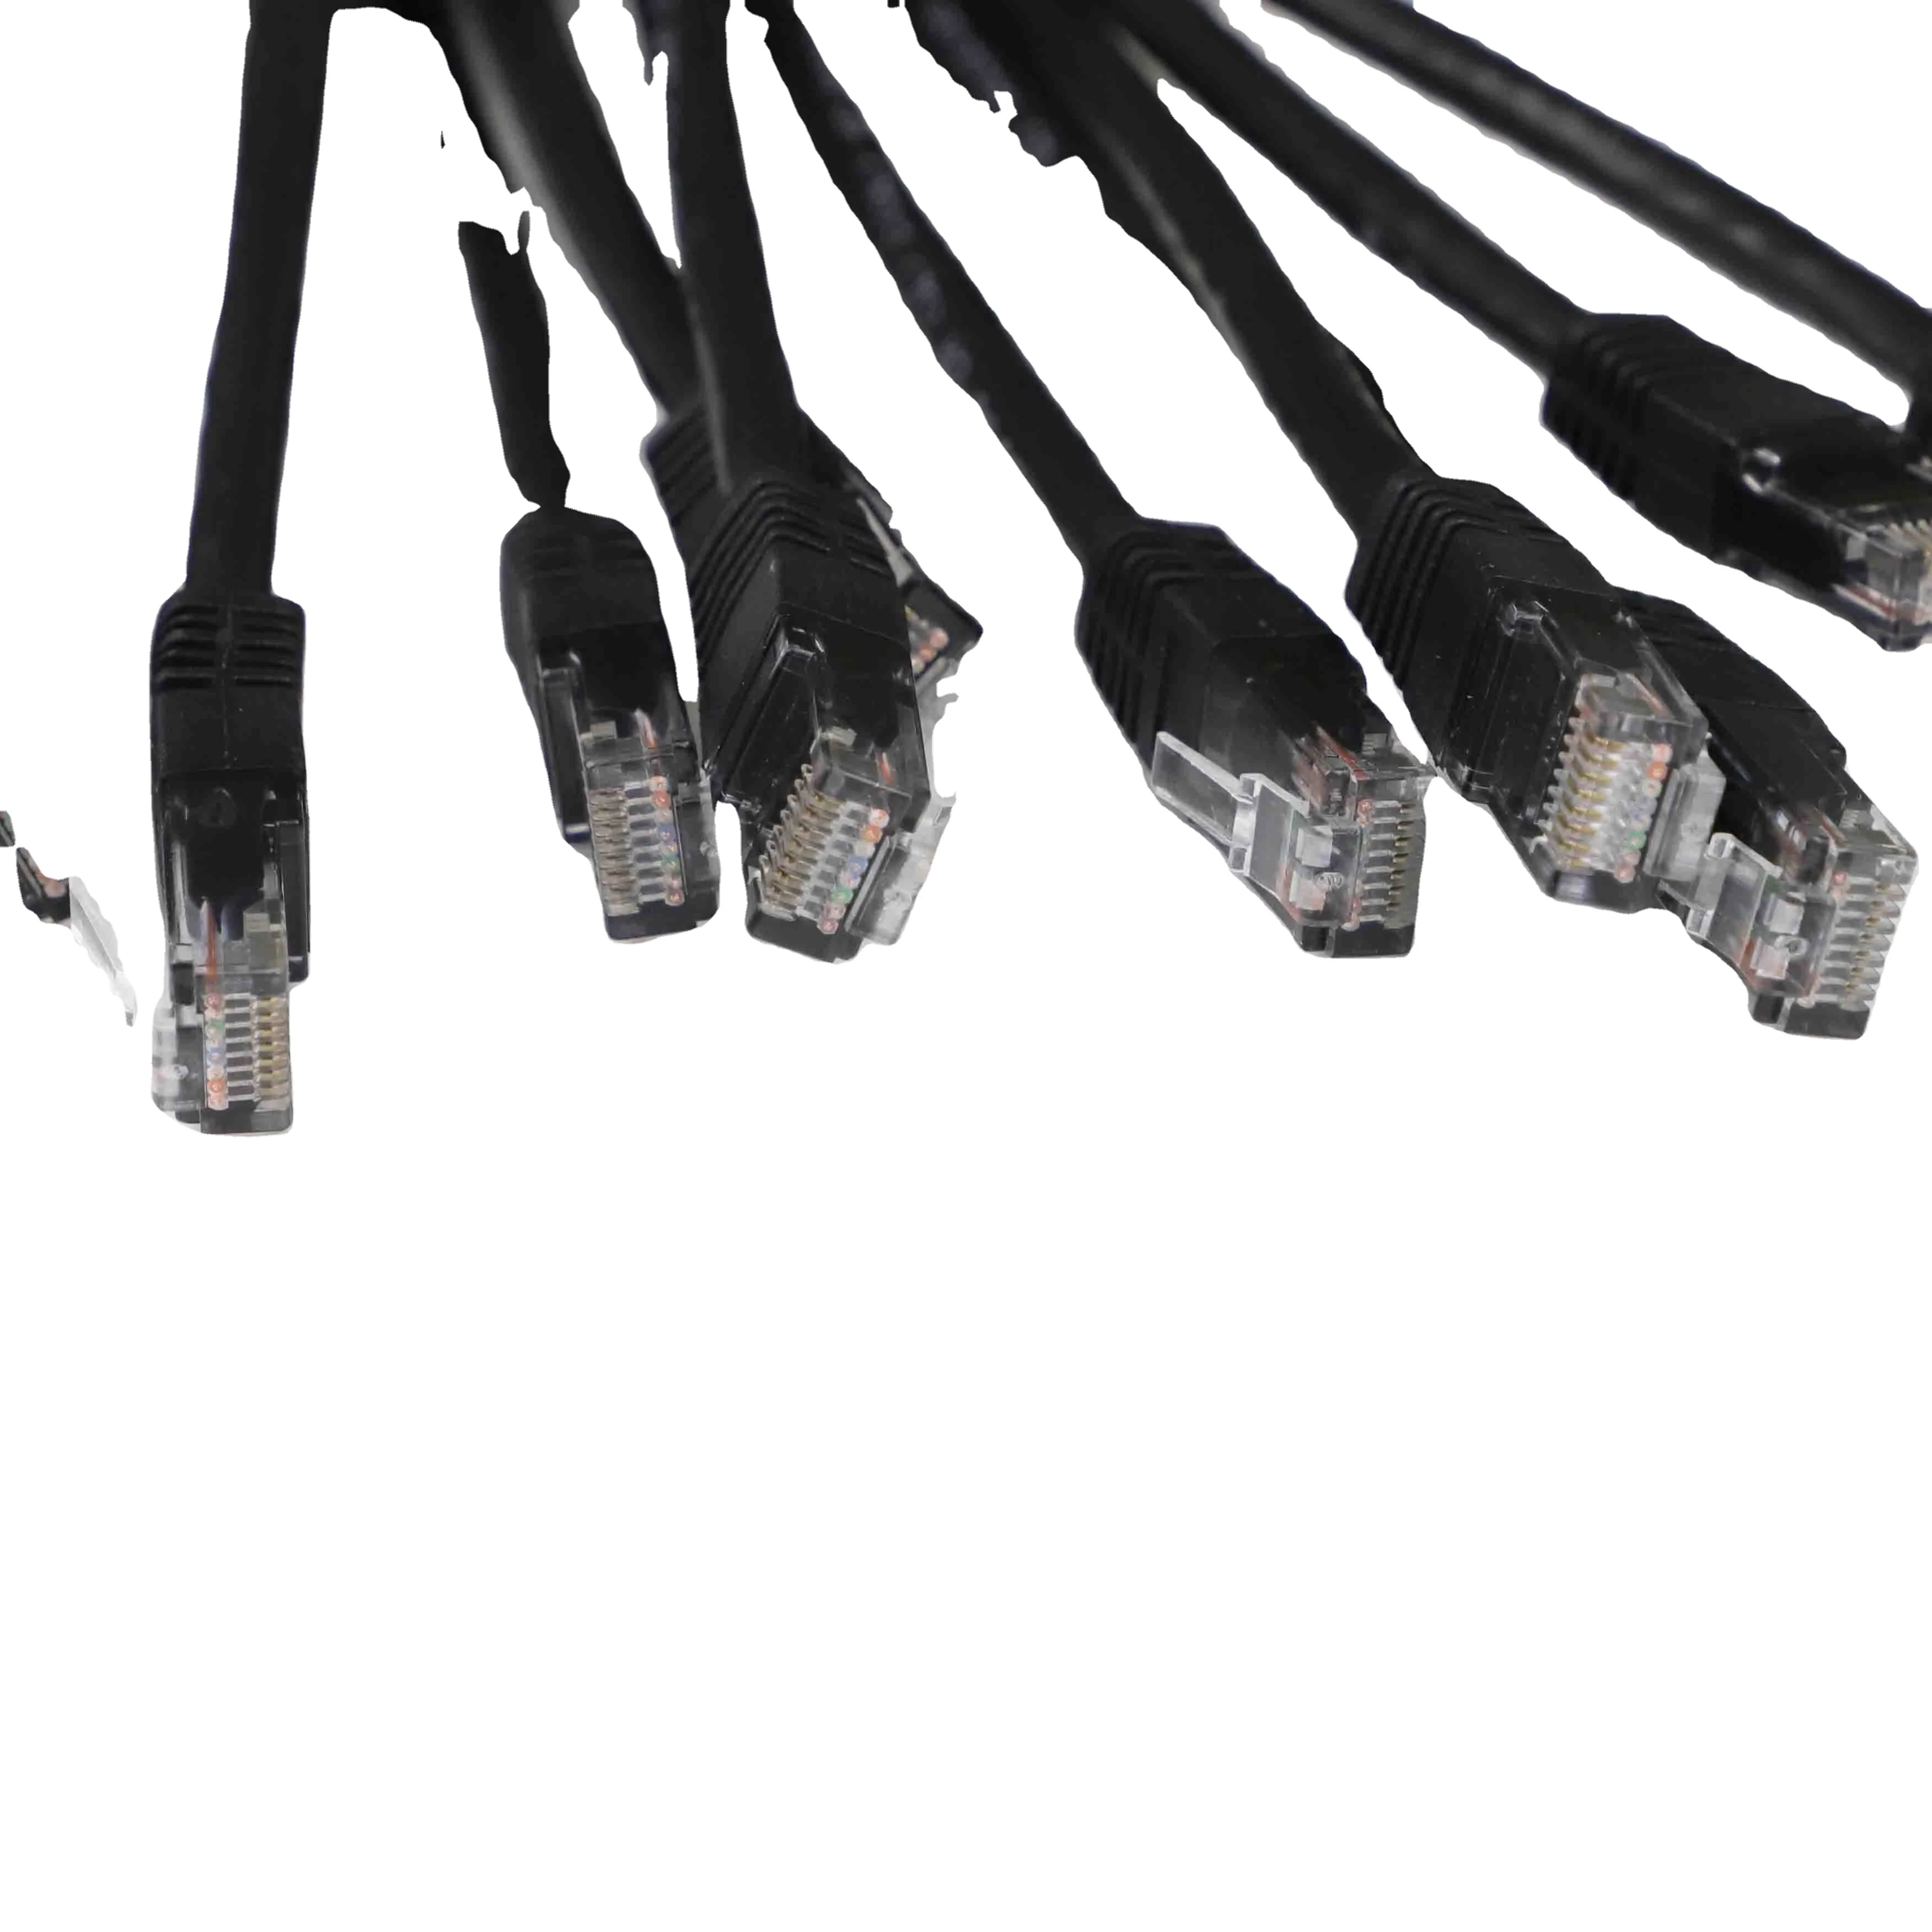 
ethernet Outdoor price 1000ft Cat6 Cat5 Network Cable for Computer 